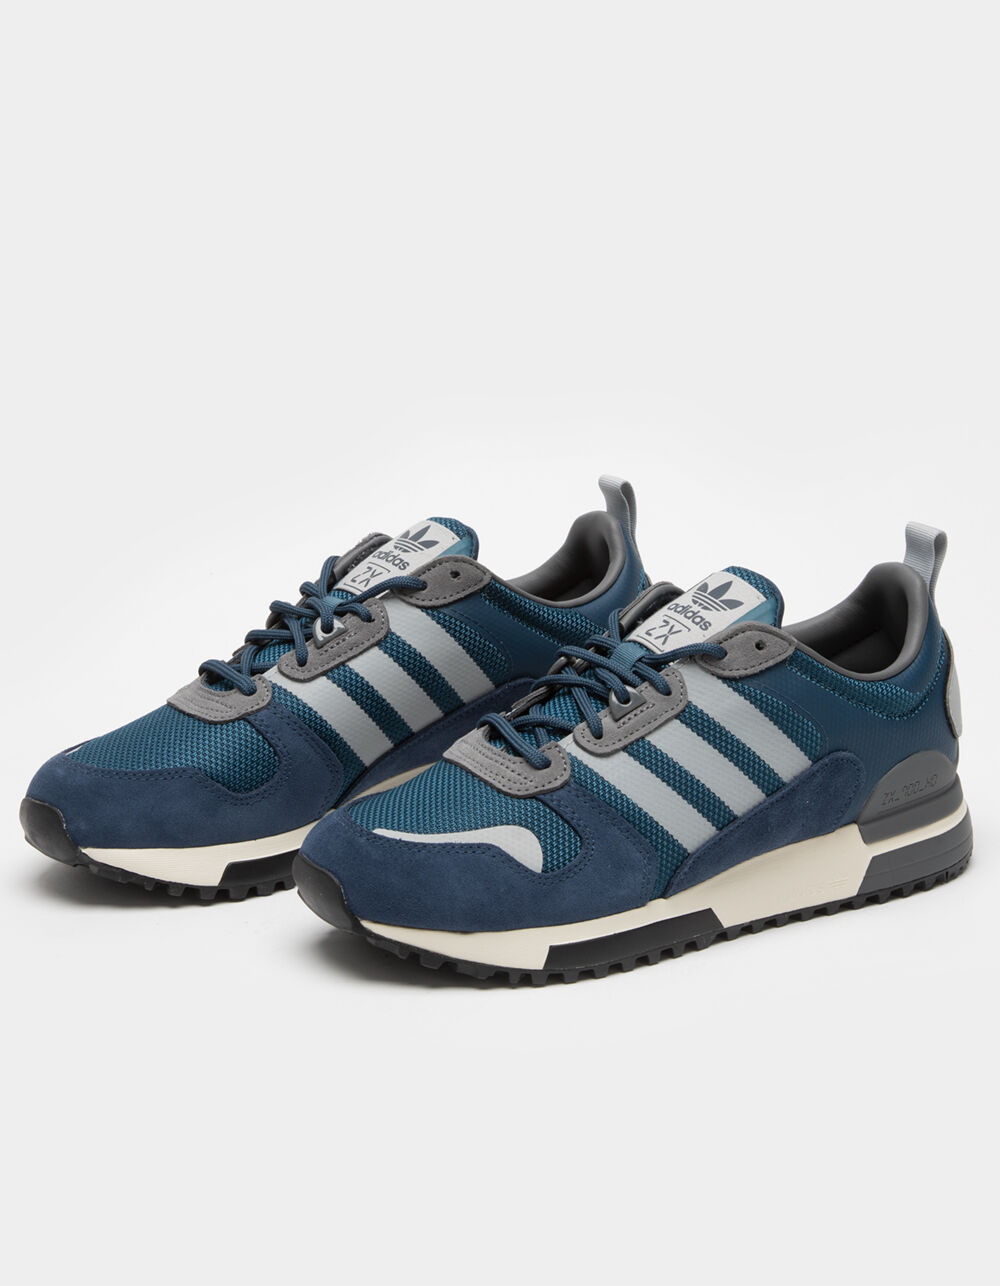 ADIDAS ZX 700 HD Shoes - NAVY COMBO | Tillys